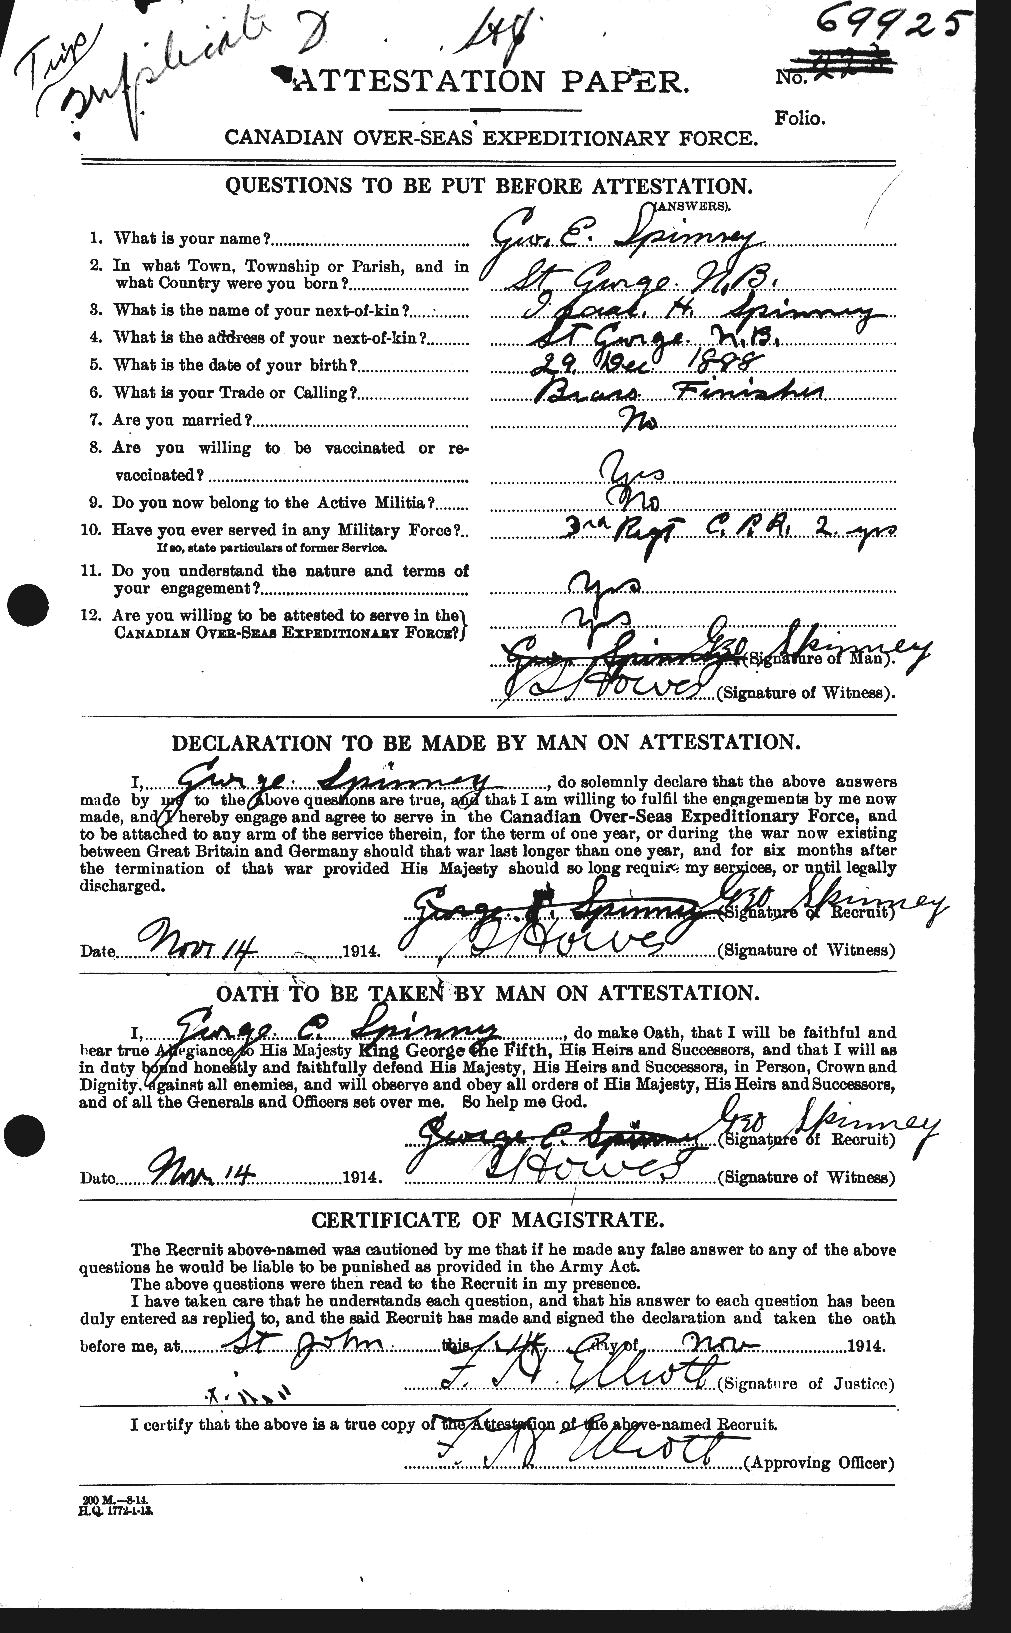 Personnel Records of the First World War - CEF 114415a